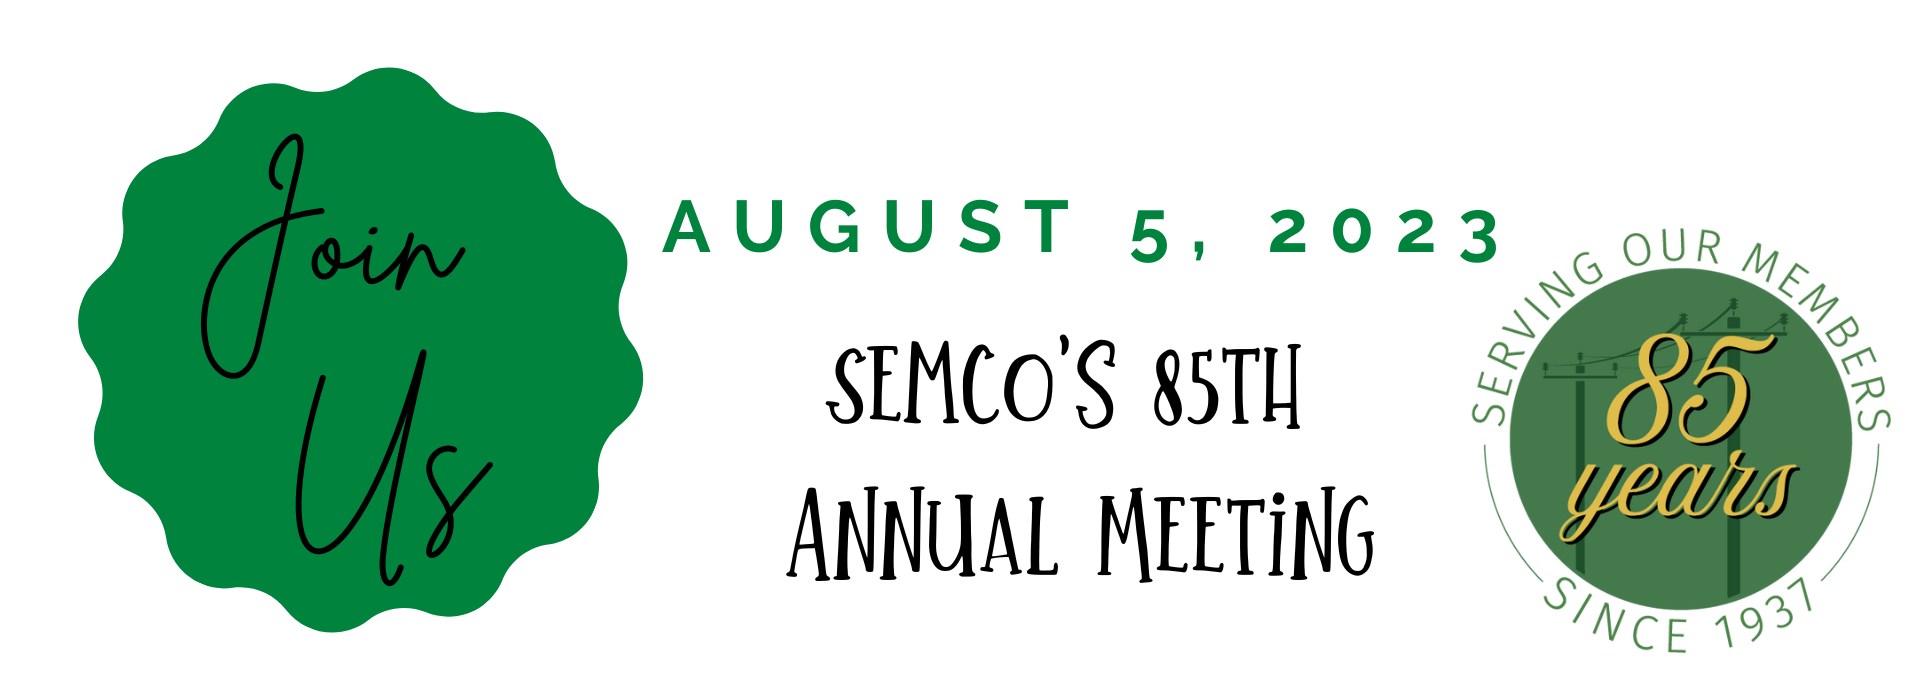 Join Us - SEMCO 85th Annual Meeting